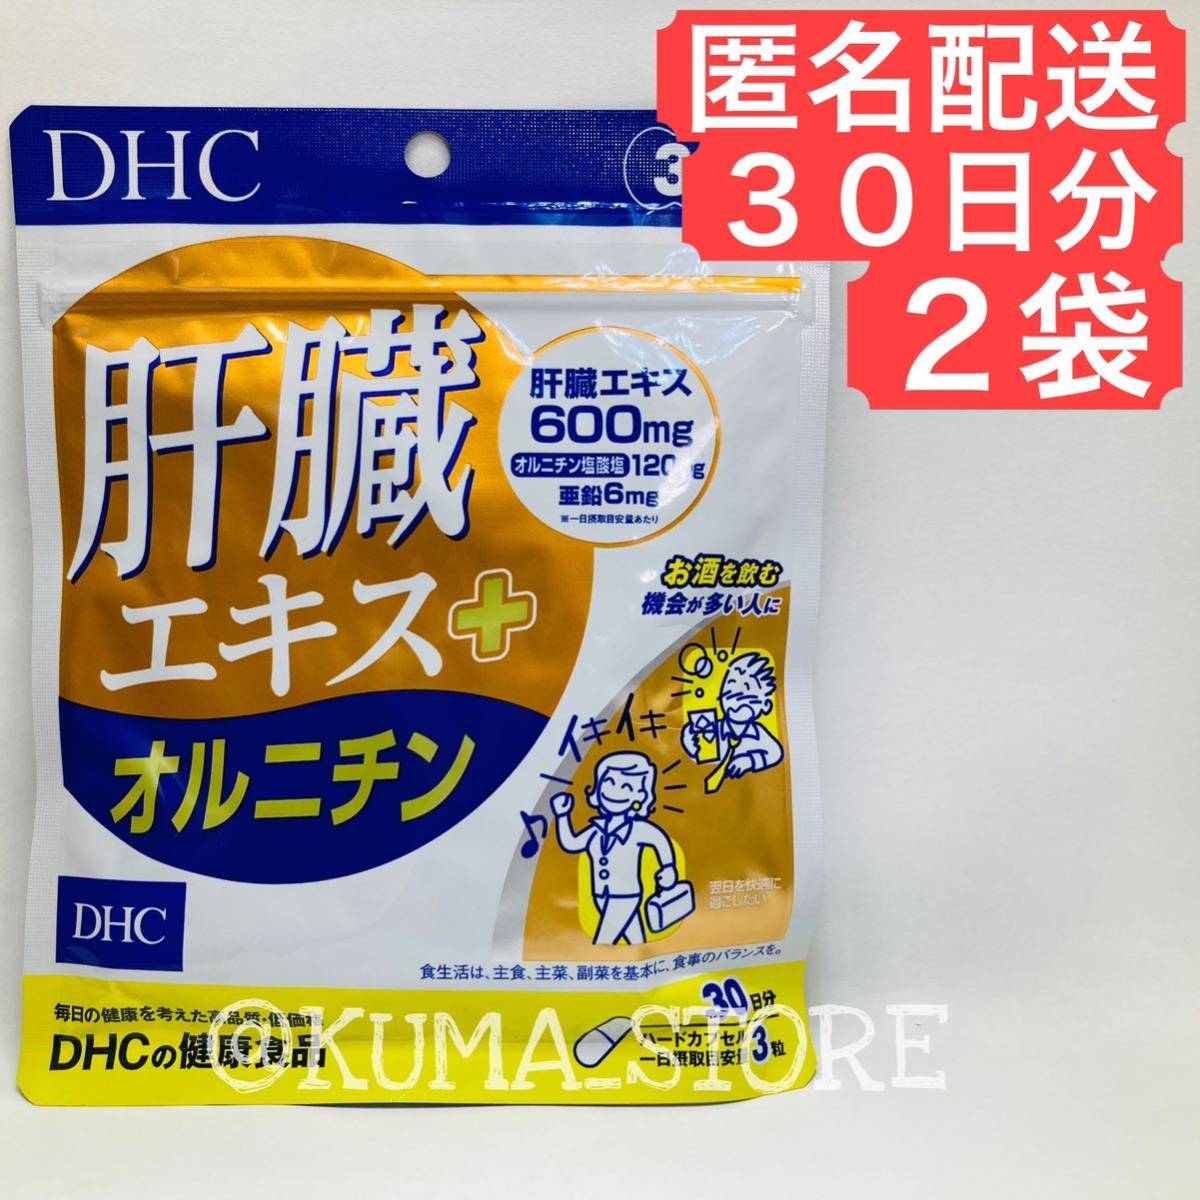 2 sack DHC.. extract ornithine 30 day minute health food supplement 